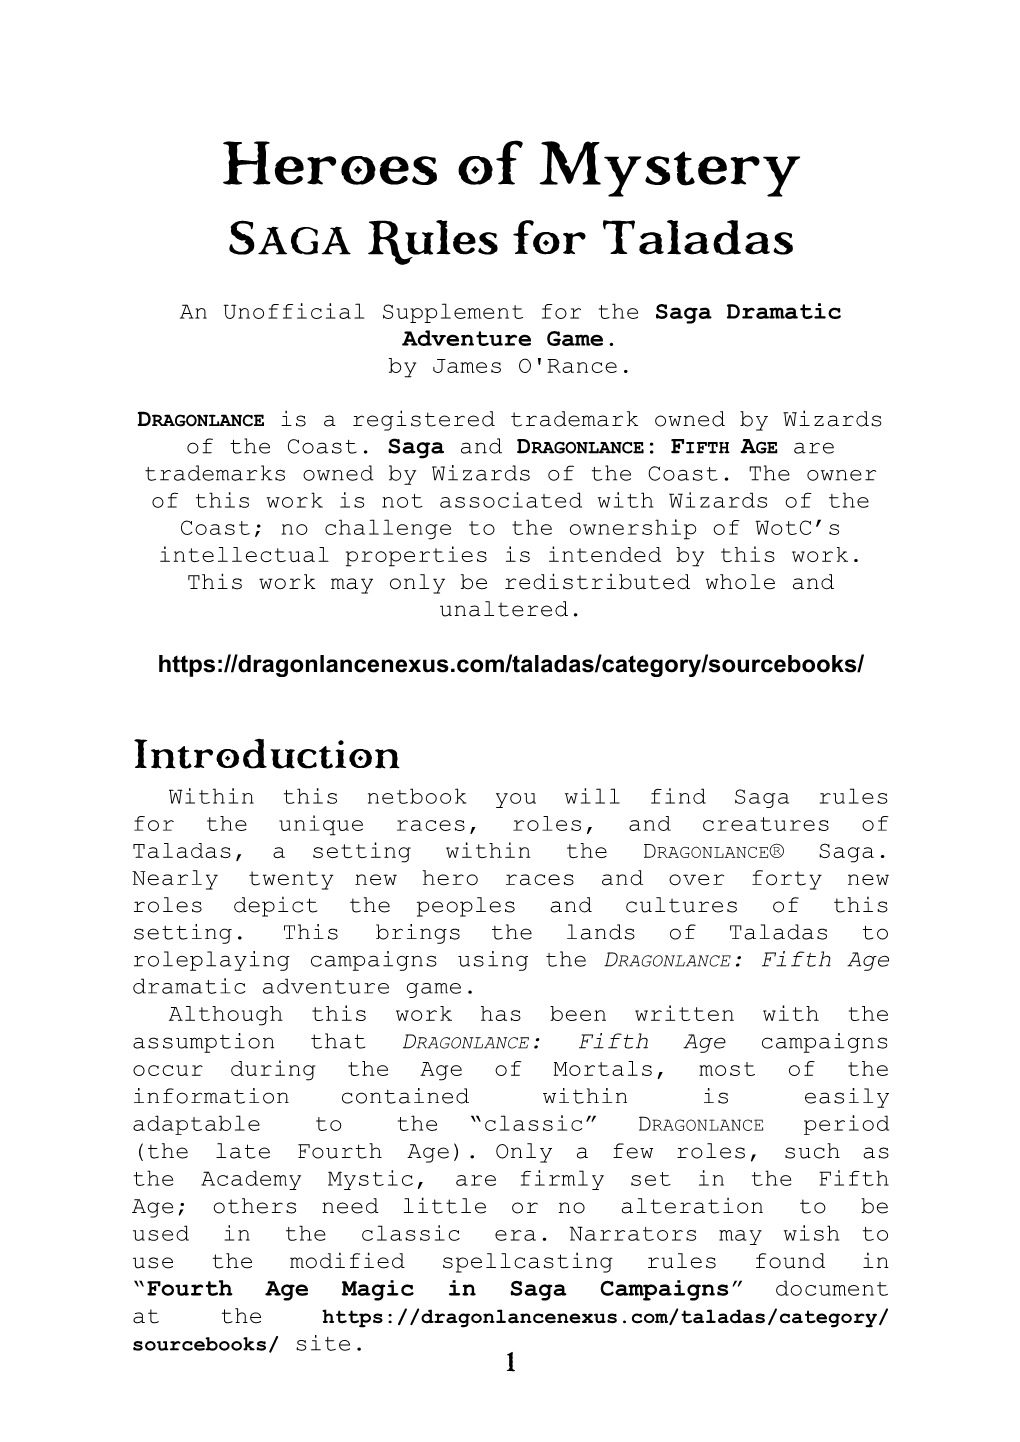 Heroes of Mystery SAGA Rules for Taladas